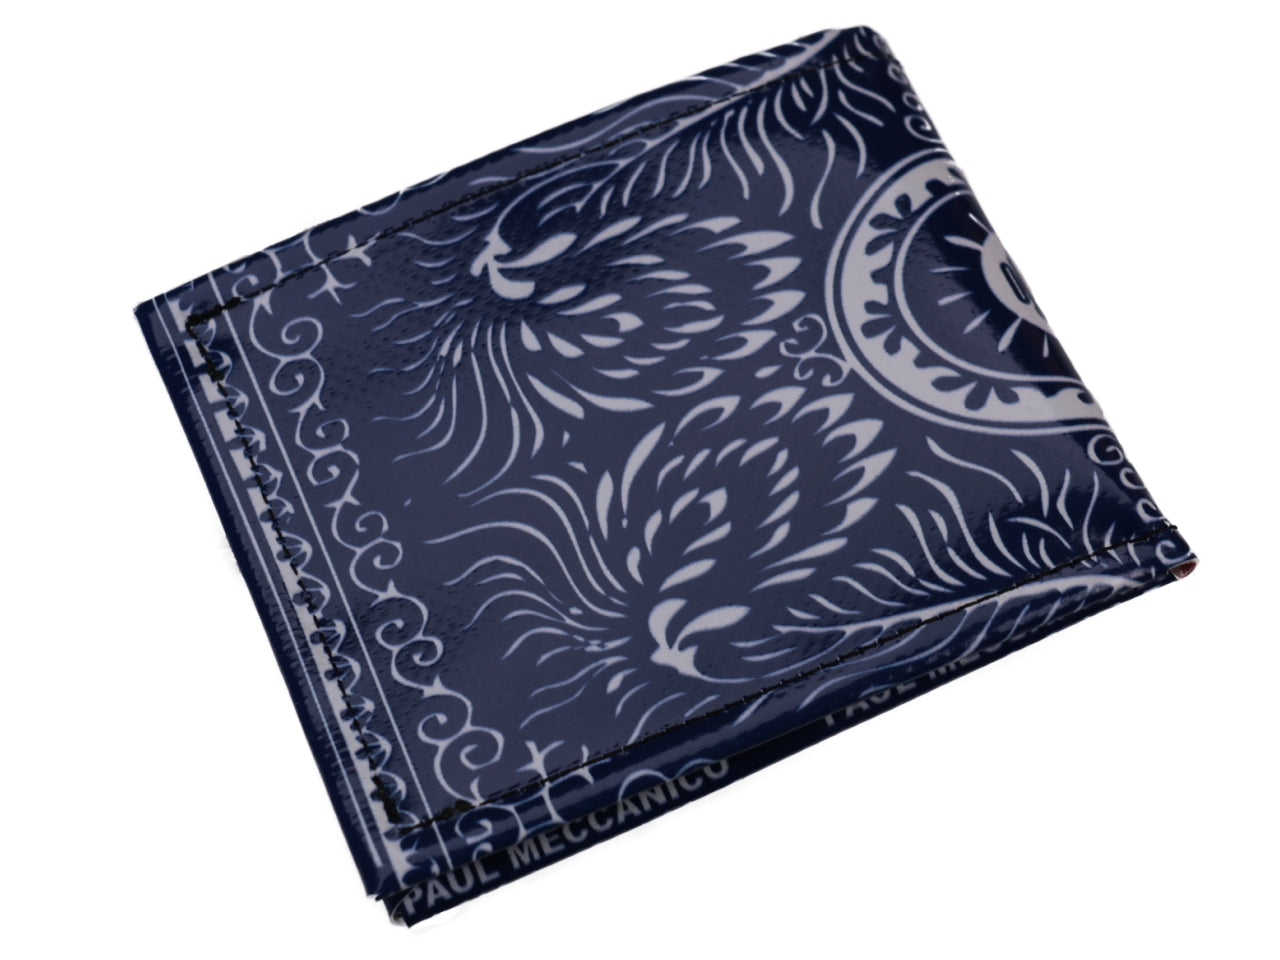 MEN'S WALLET BLUE WITH FLORAL FANTASY. MODEL CRIK MADE OF LORRY TARPAULIN. - Limited Edition Paul Meccanico